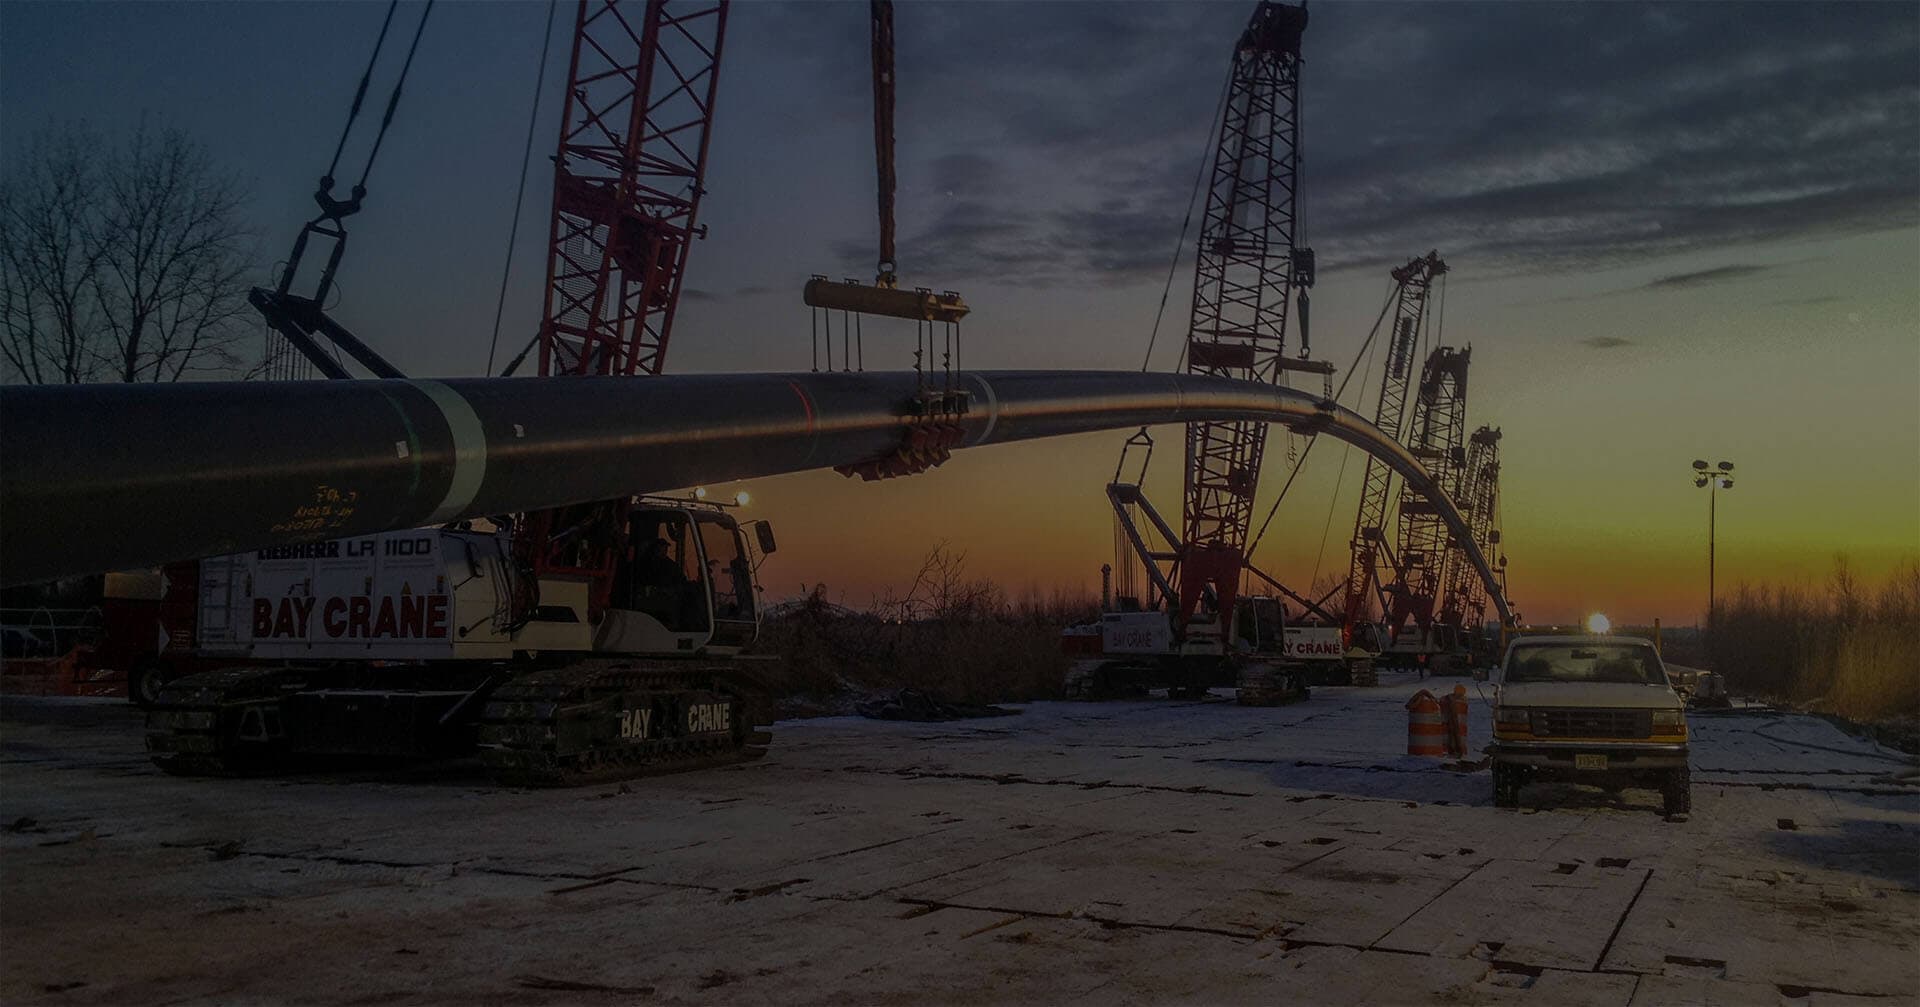 Cranes holding up large pipe